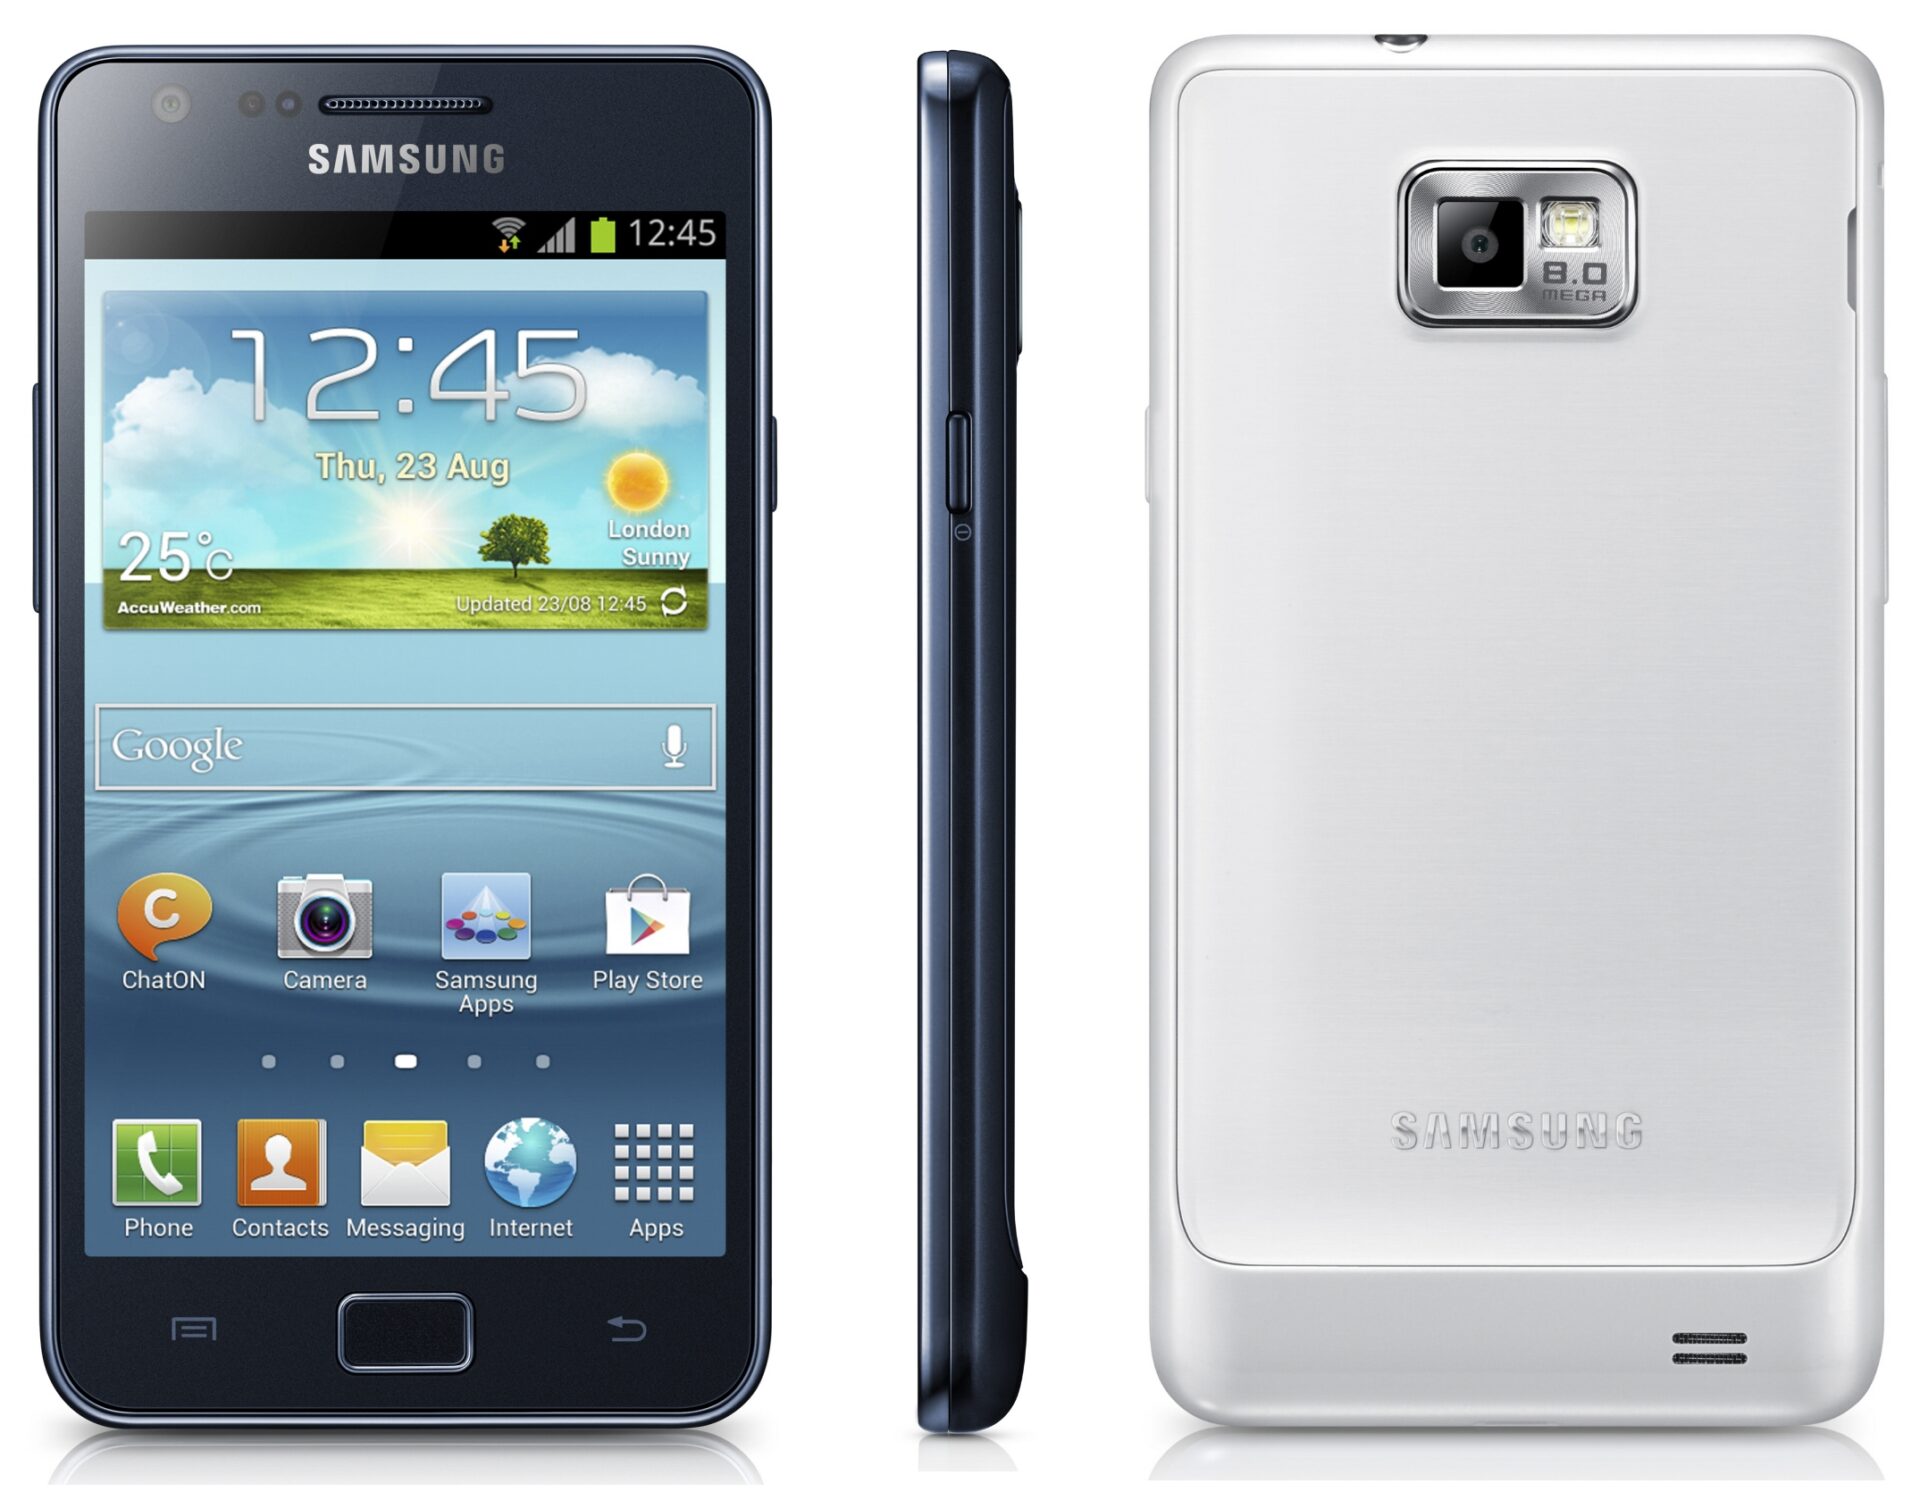 Samsung galaxy s2 official android 2.3.6